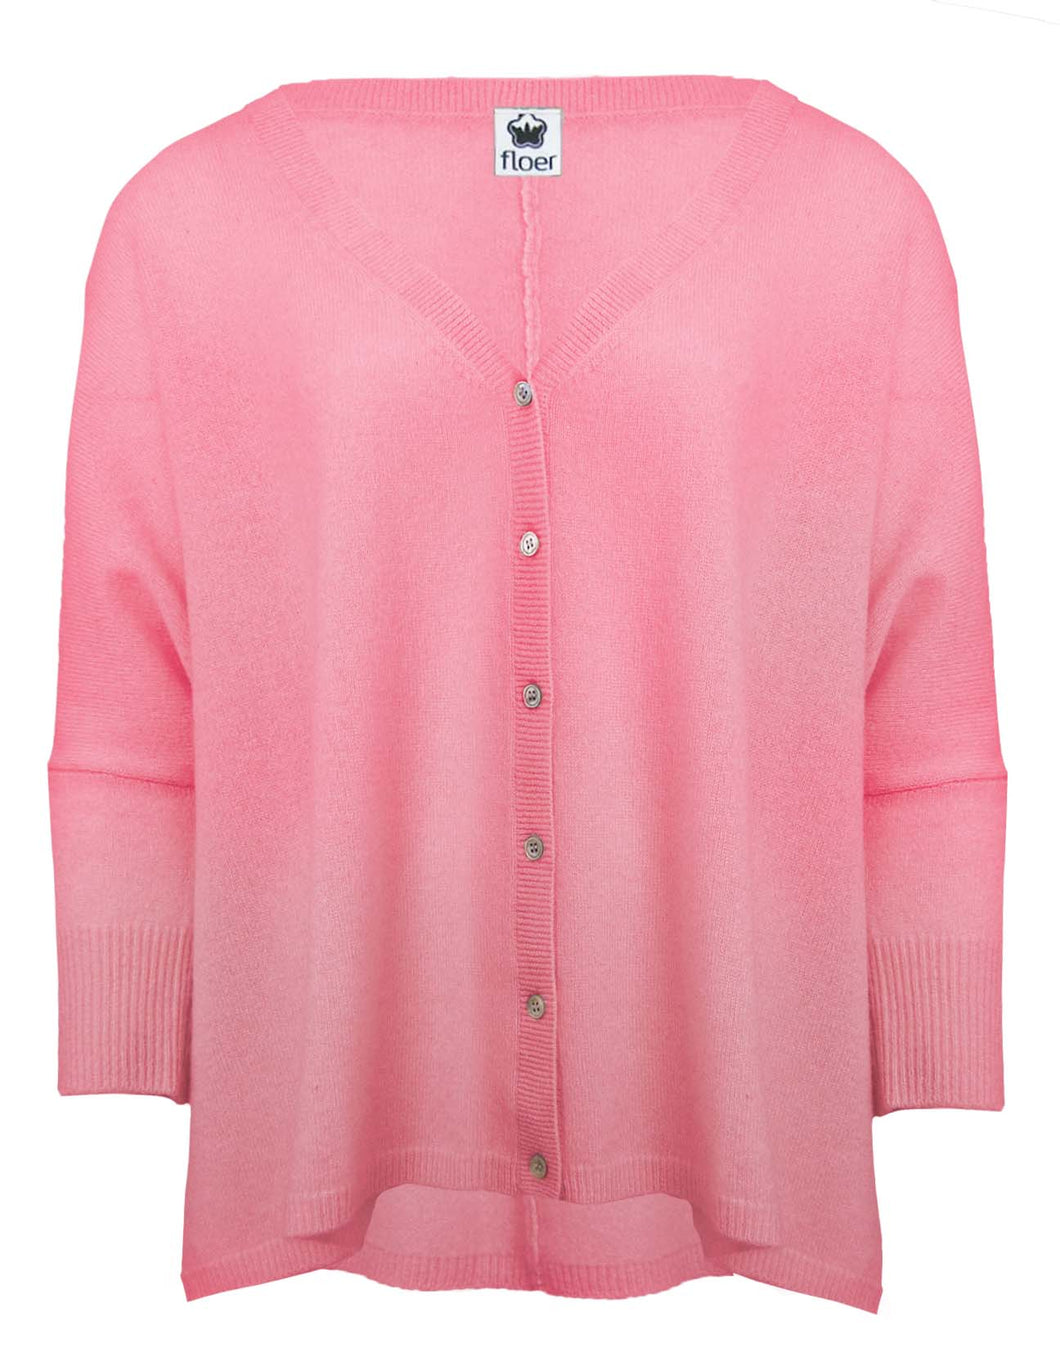 Cotton/ Cashmere Sweater/Cardigan - candy